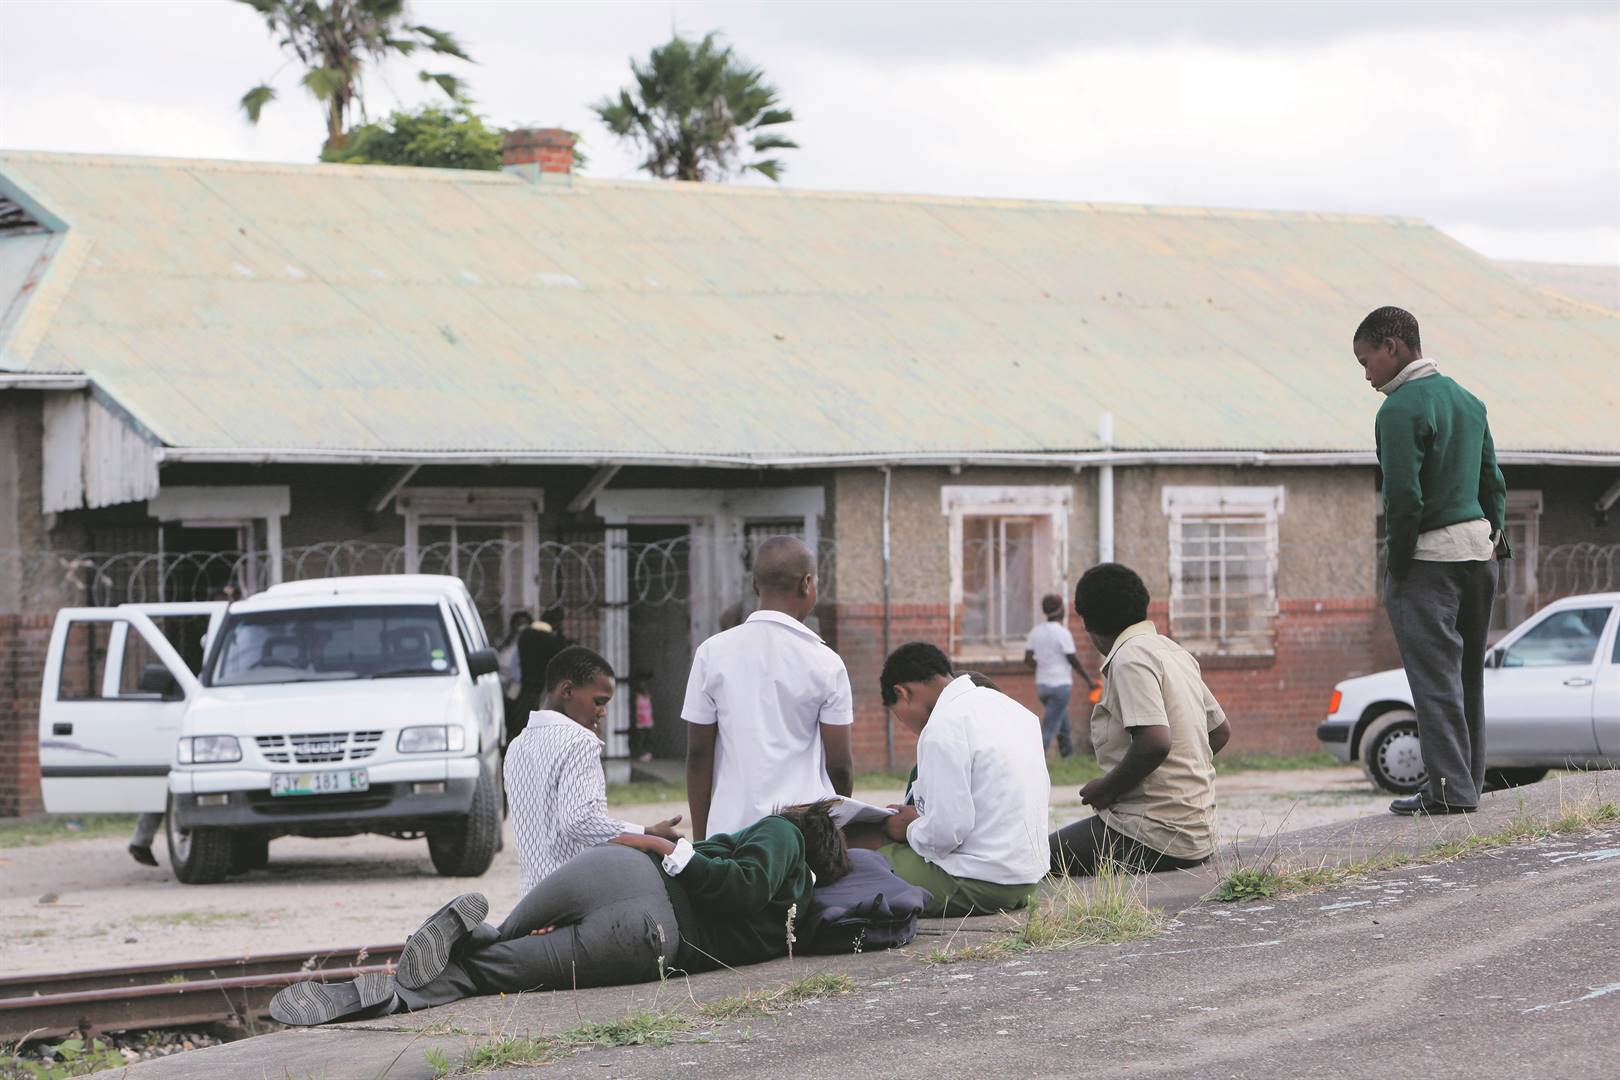 Amasango Career School is a special needs school on the outskirts of Makhanda, Eastern Cape, which is currently housed on disused railway land. The school has been in a court battle with the department of education to provide adequate facilities. Photos: Zute Lightfoot